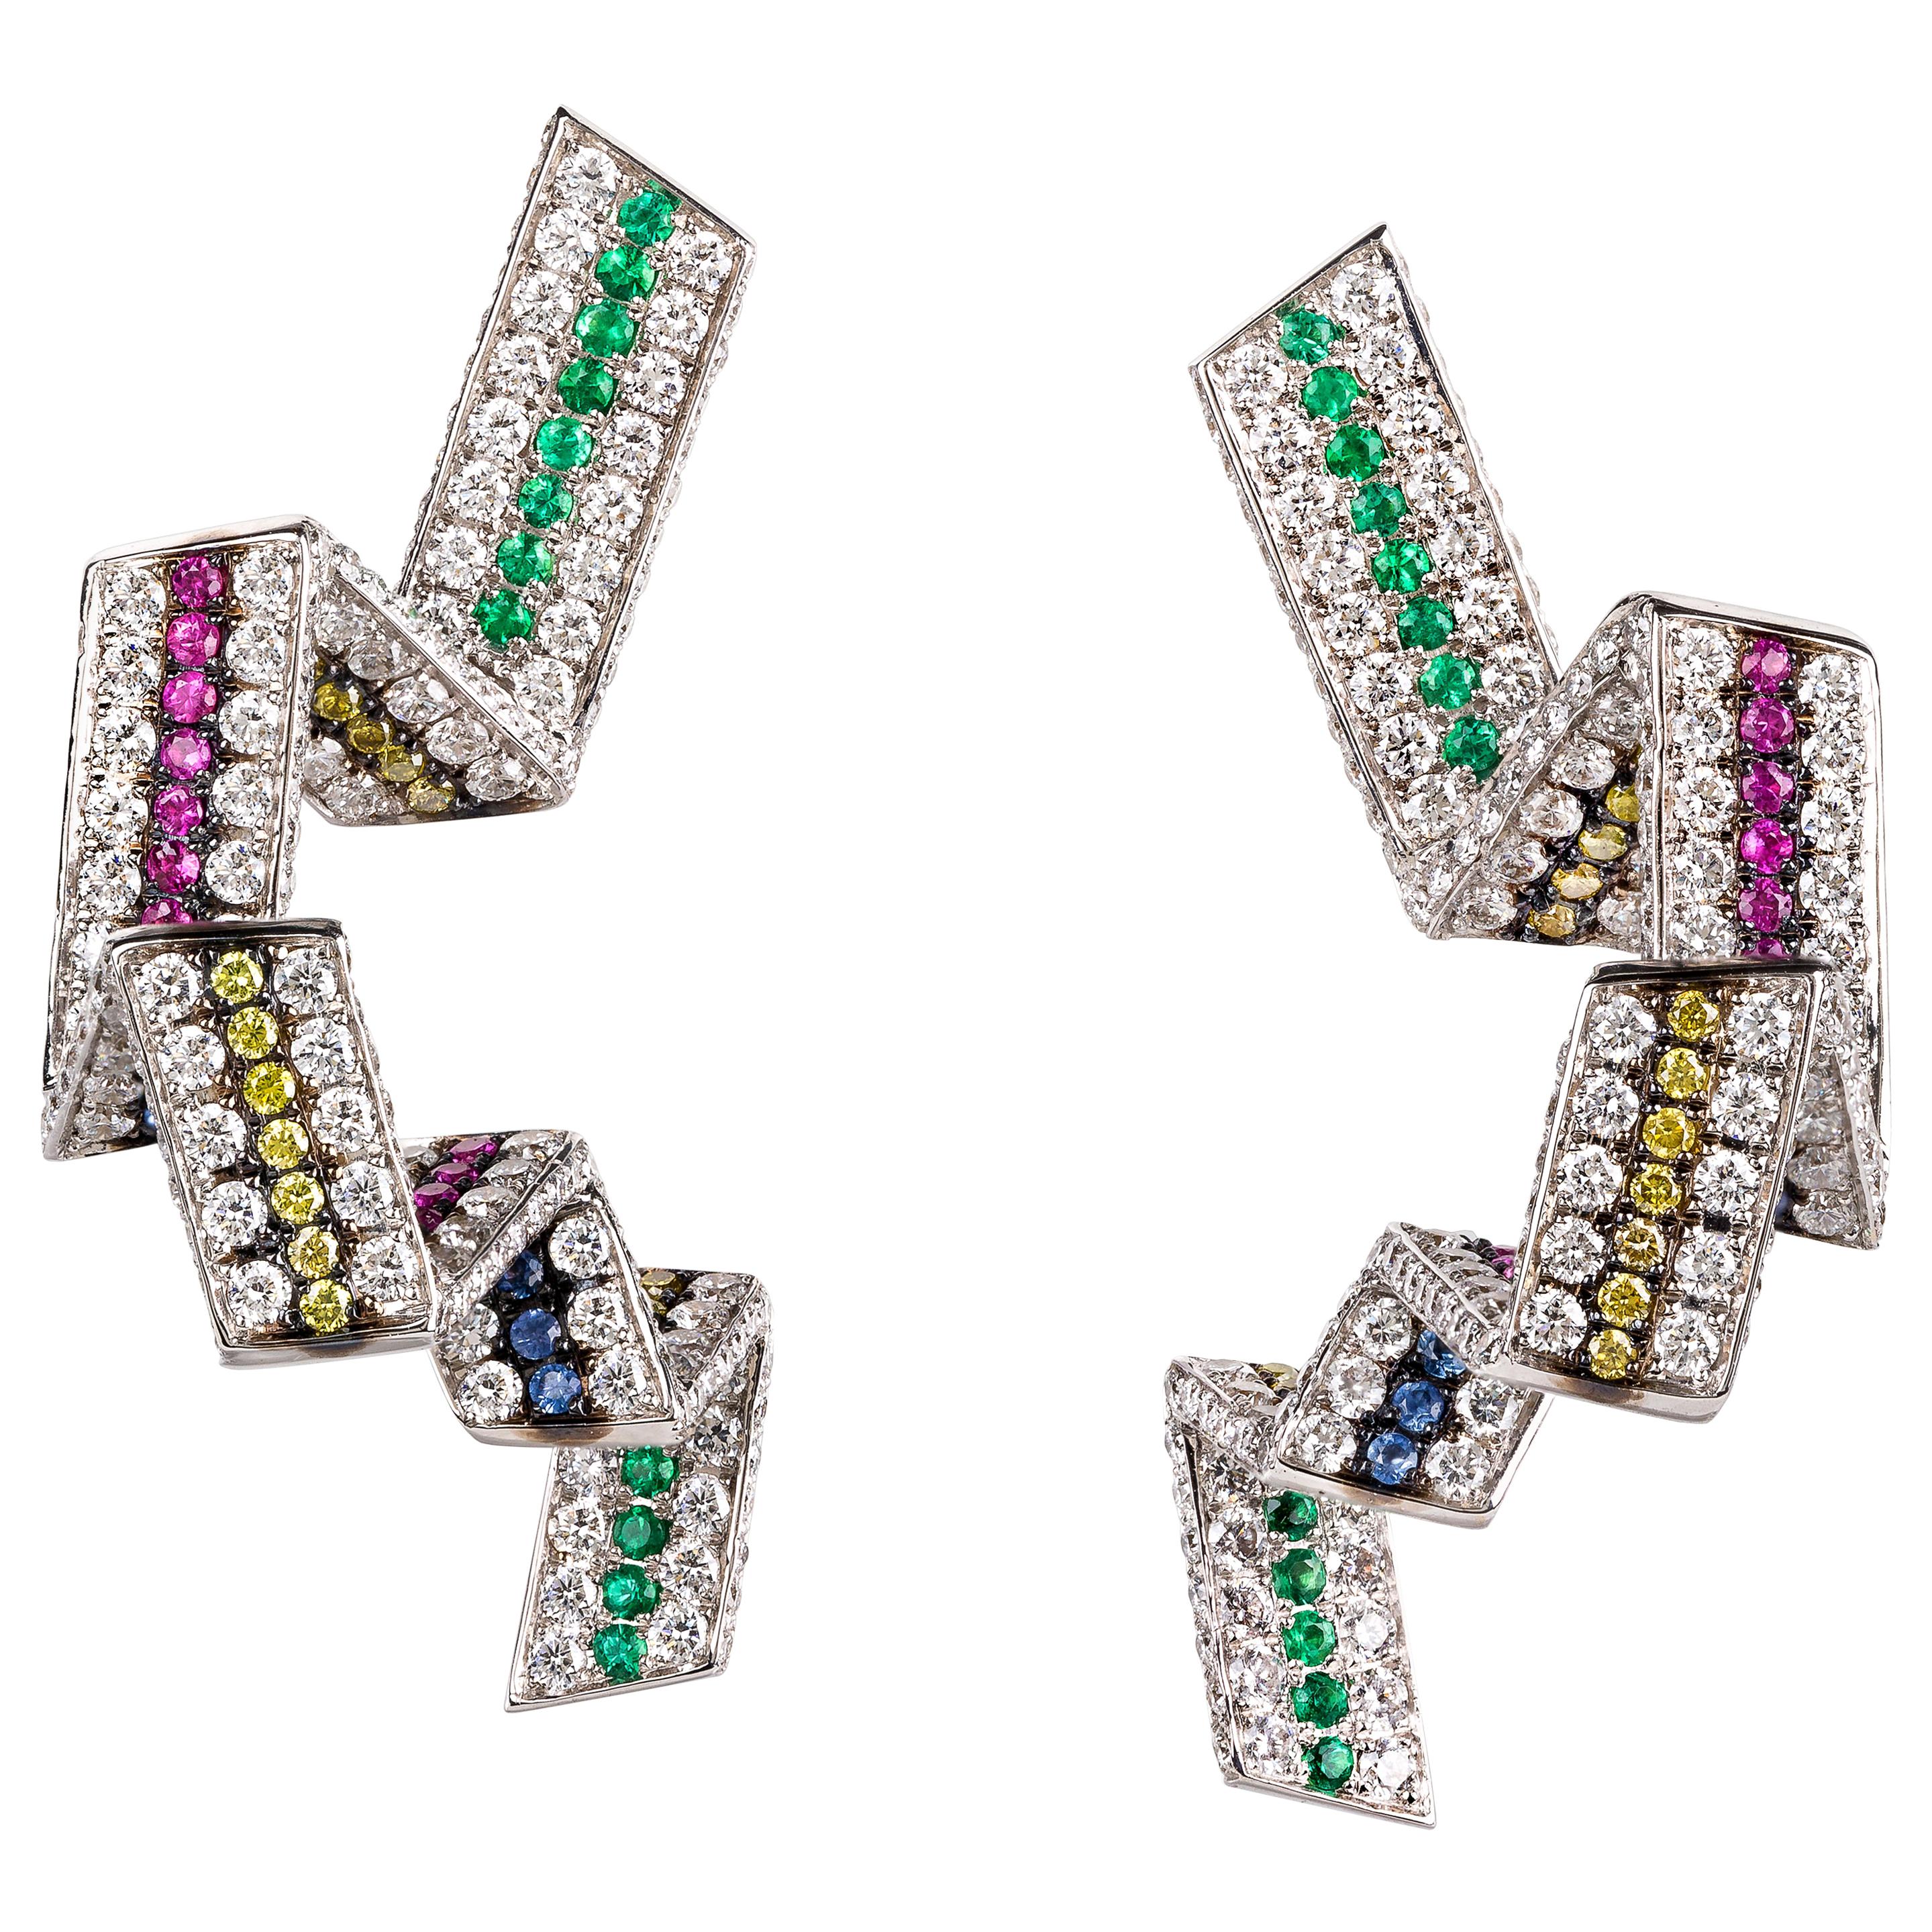 Rosior one-off Diamond, Emerald and Sapphire Dangle Earrings set in White Gold